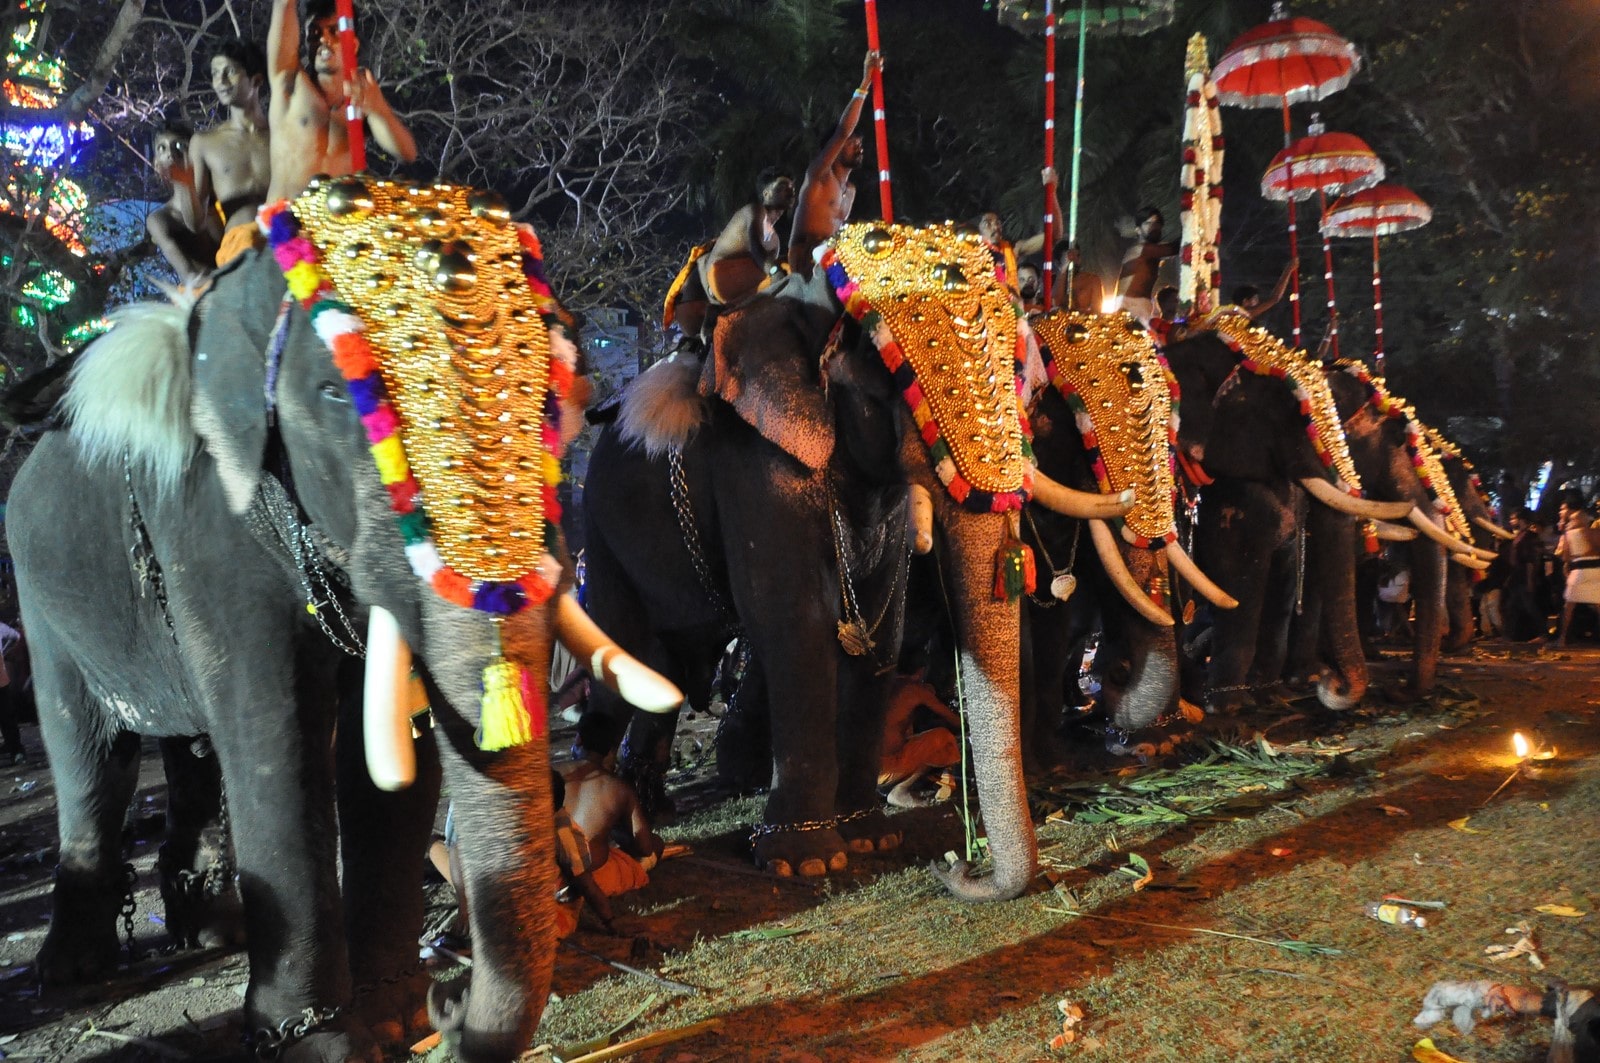 Caparisoned elephants gear up for the procession